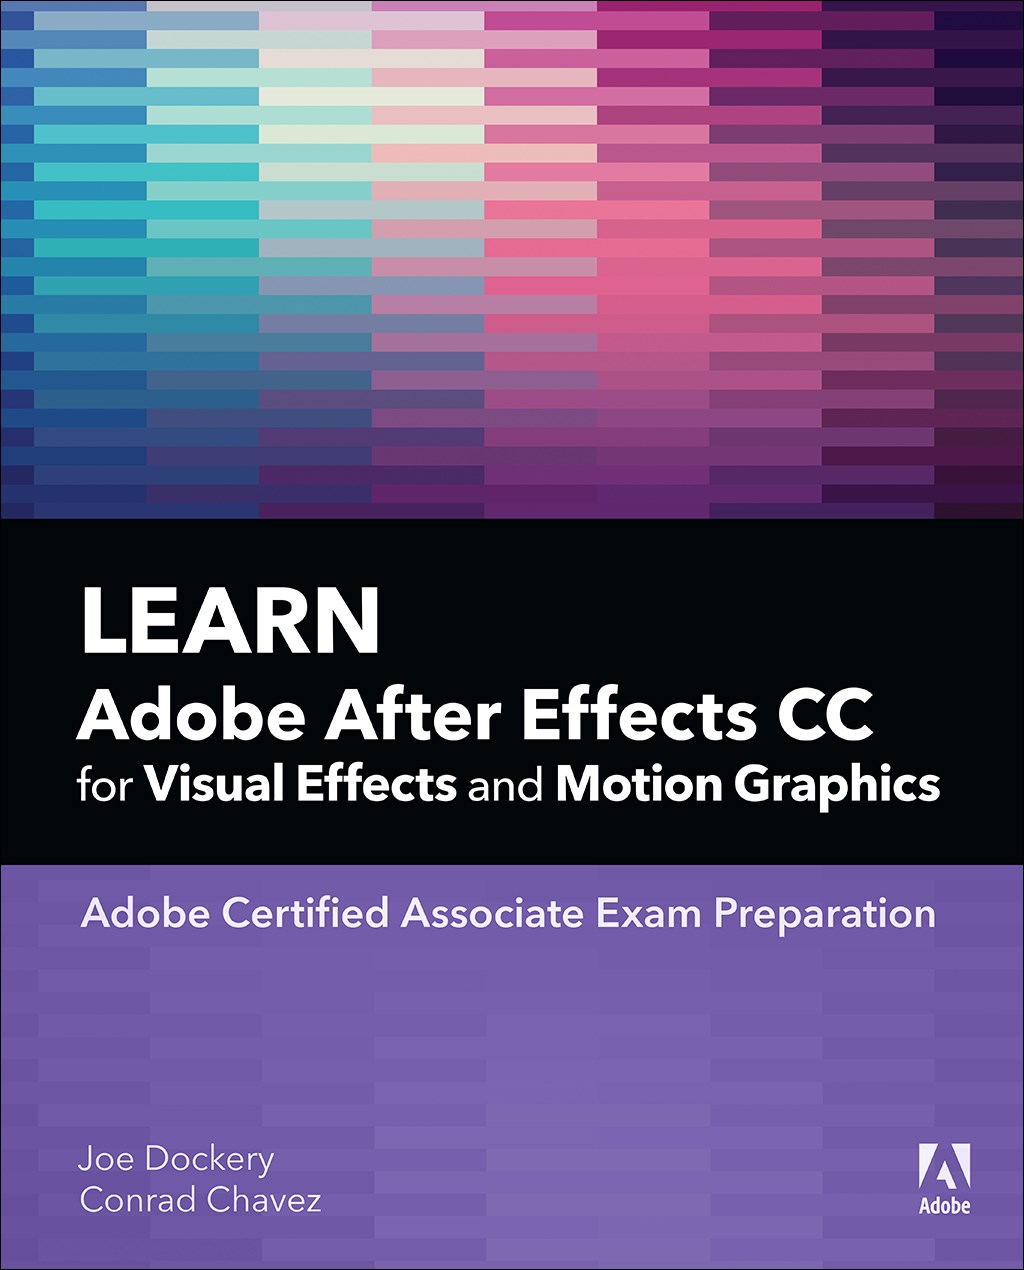 Learn Adobe After Effects CC for Visual Effects and Motion Graphics (Web Edition)